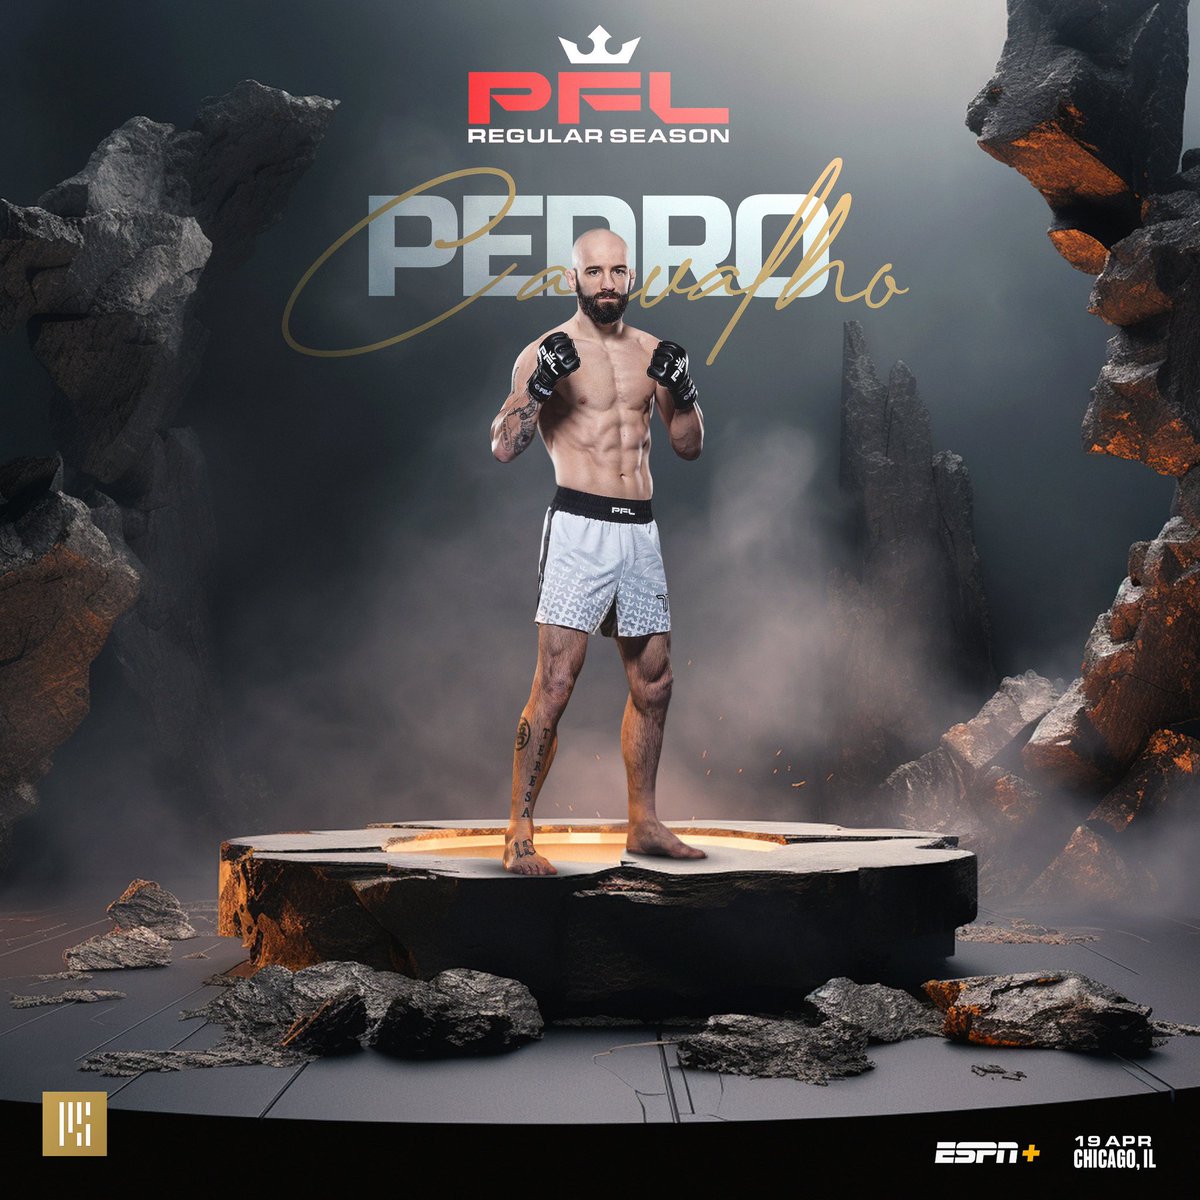 The co-main event. 🔥 It’s fight day in Chicago, Pedro Carvalho takes on Brendan Loughnane today at the #PFLRegularSeason live on ESPN+ @The_Game_MMA | @PFLMMA